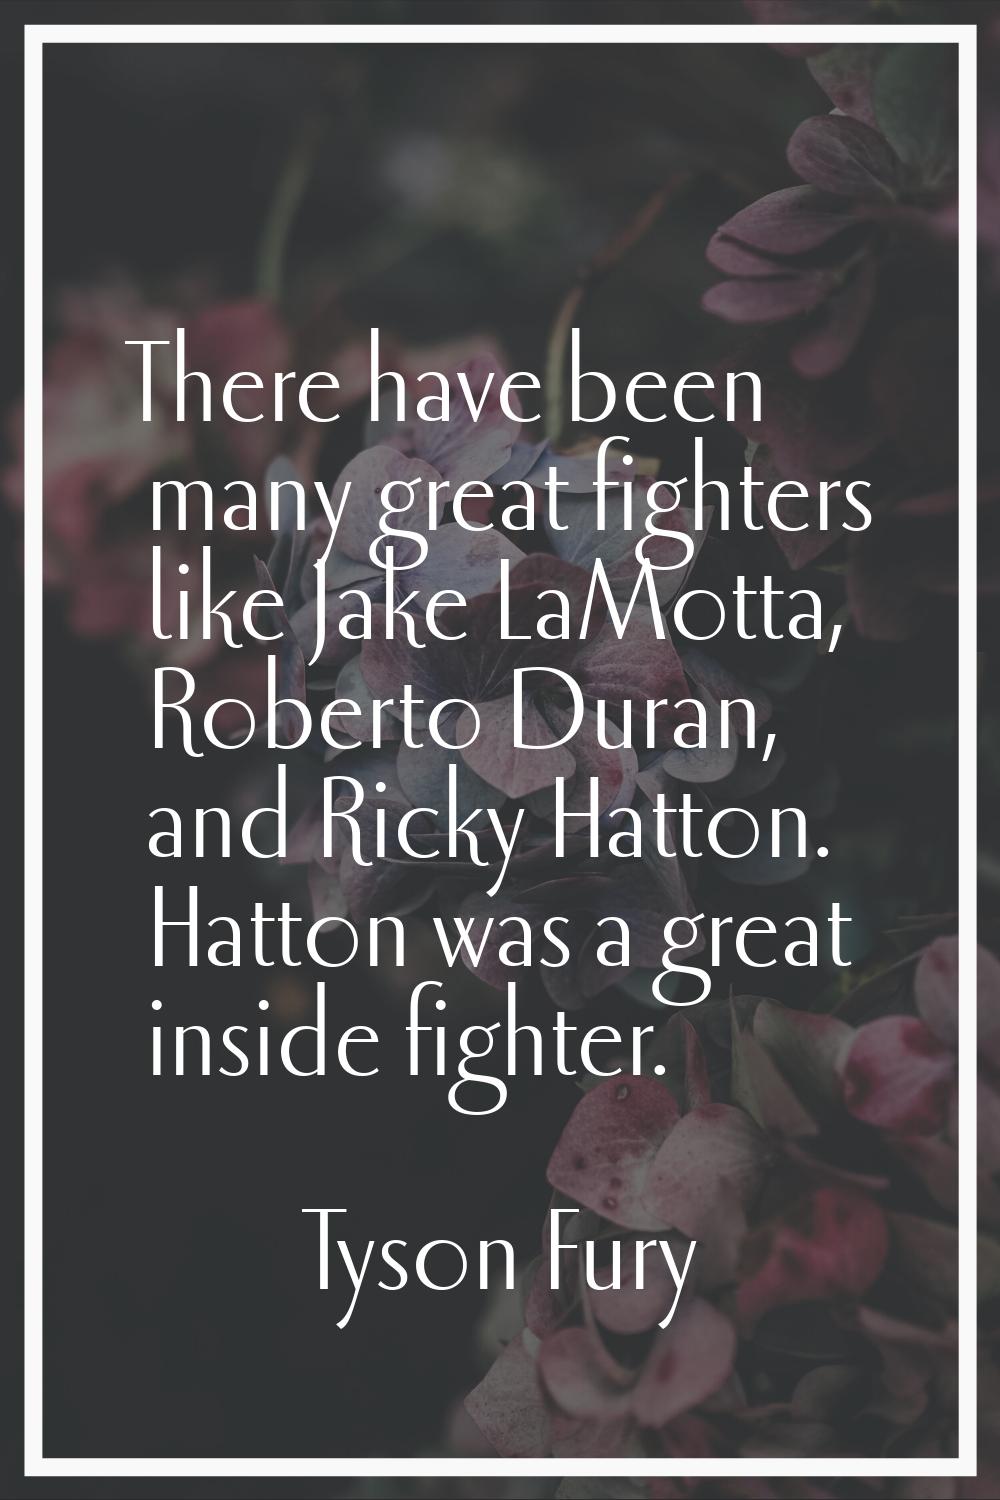 There have been many great fighters like Jake LaMotta, Roberto Duran, and Ricky Hatton. Hatton was 